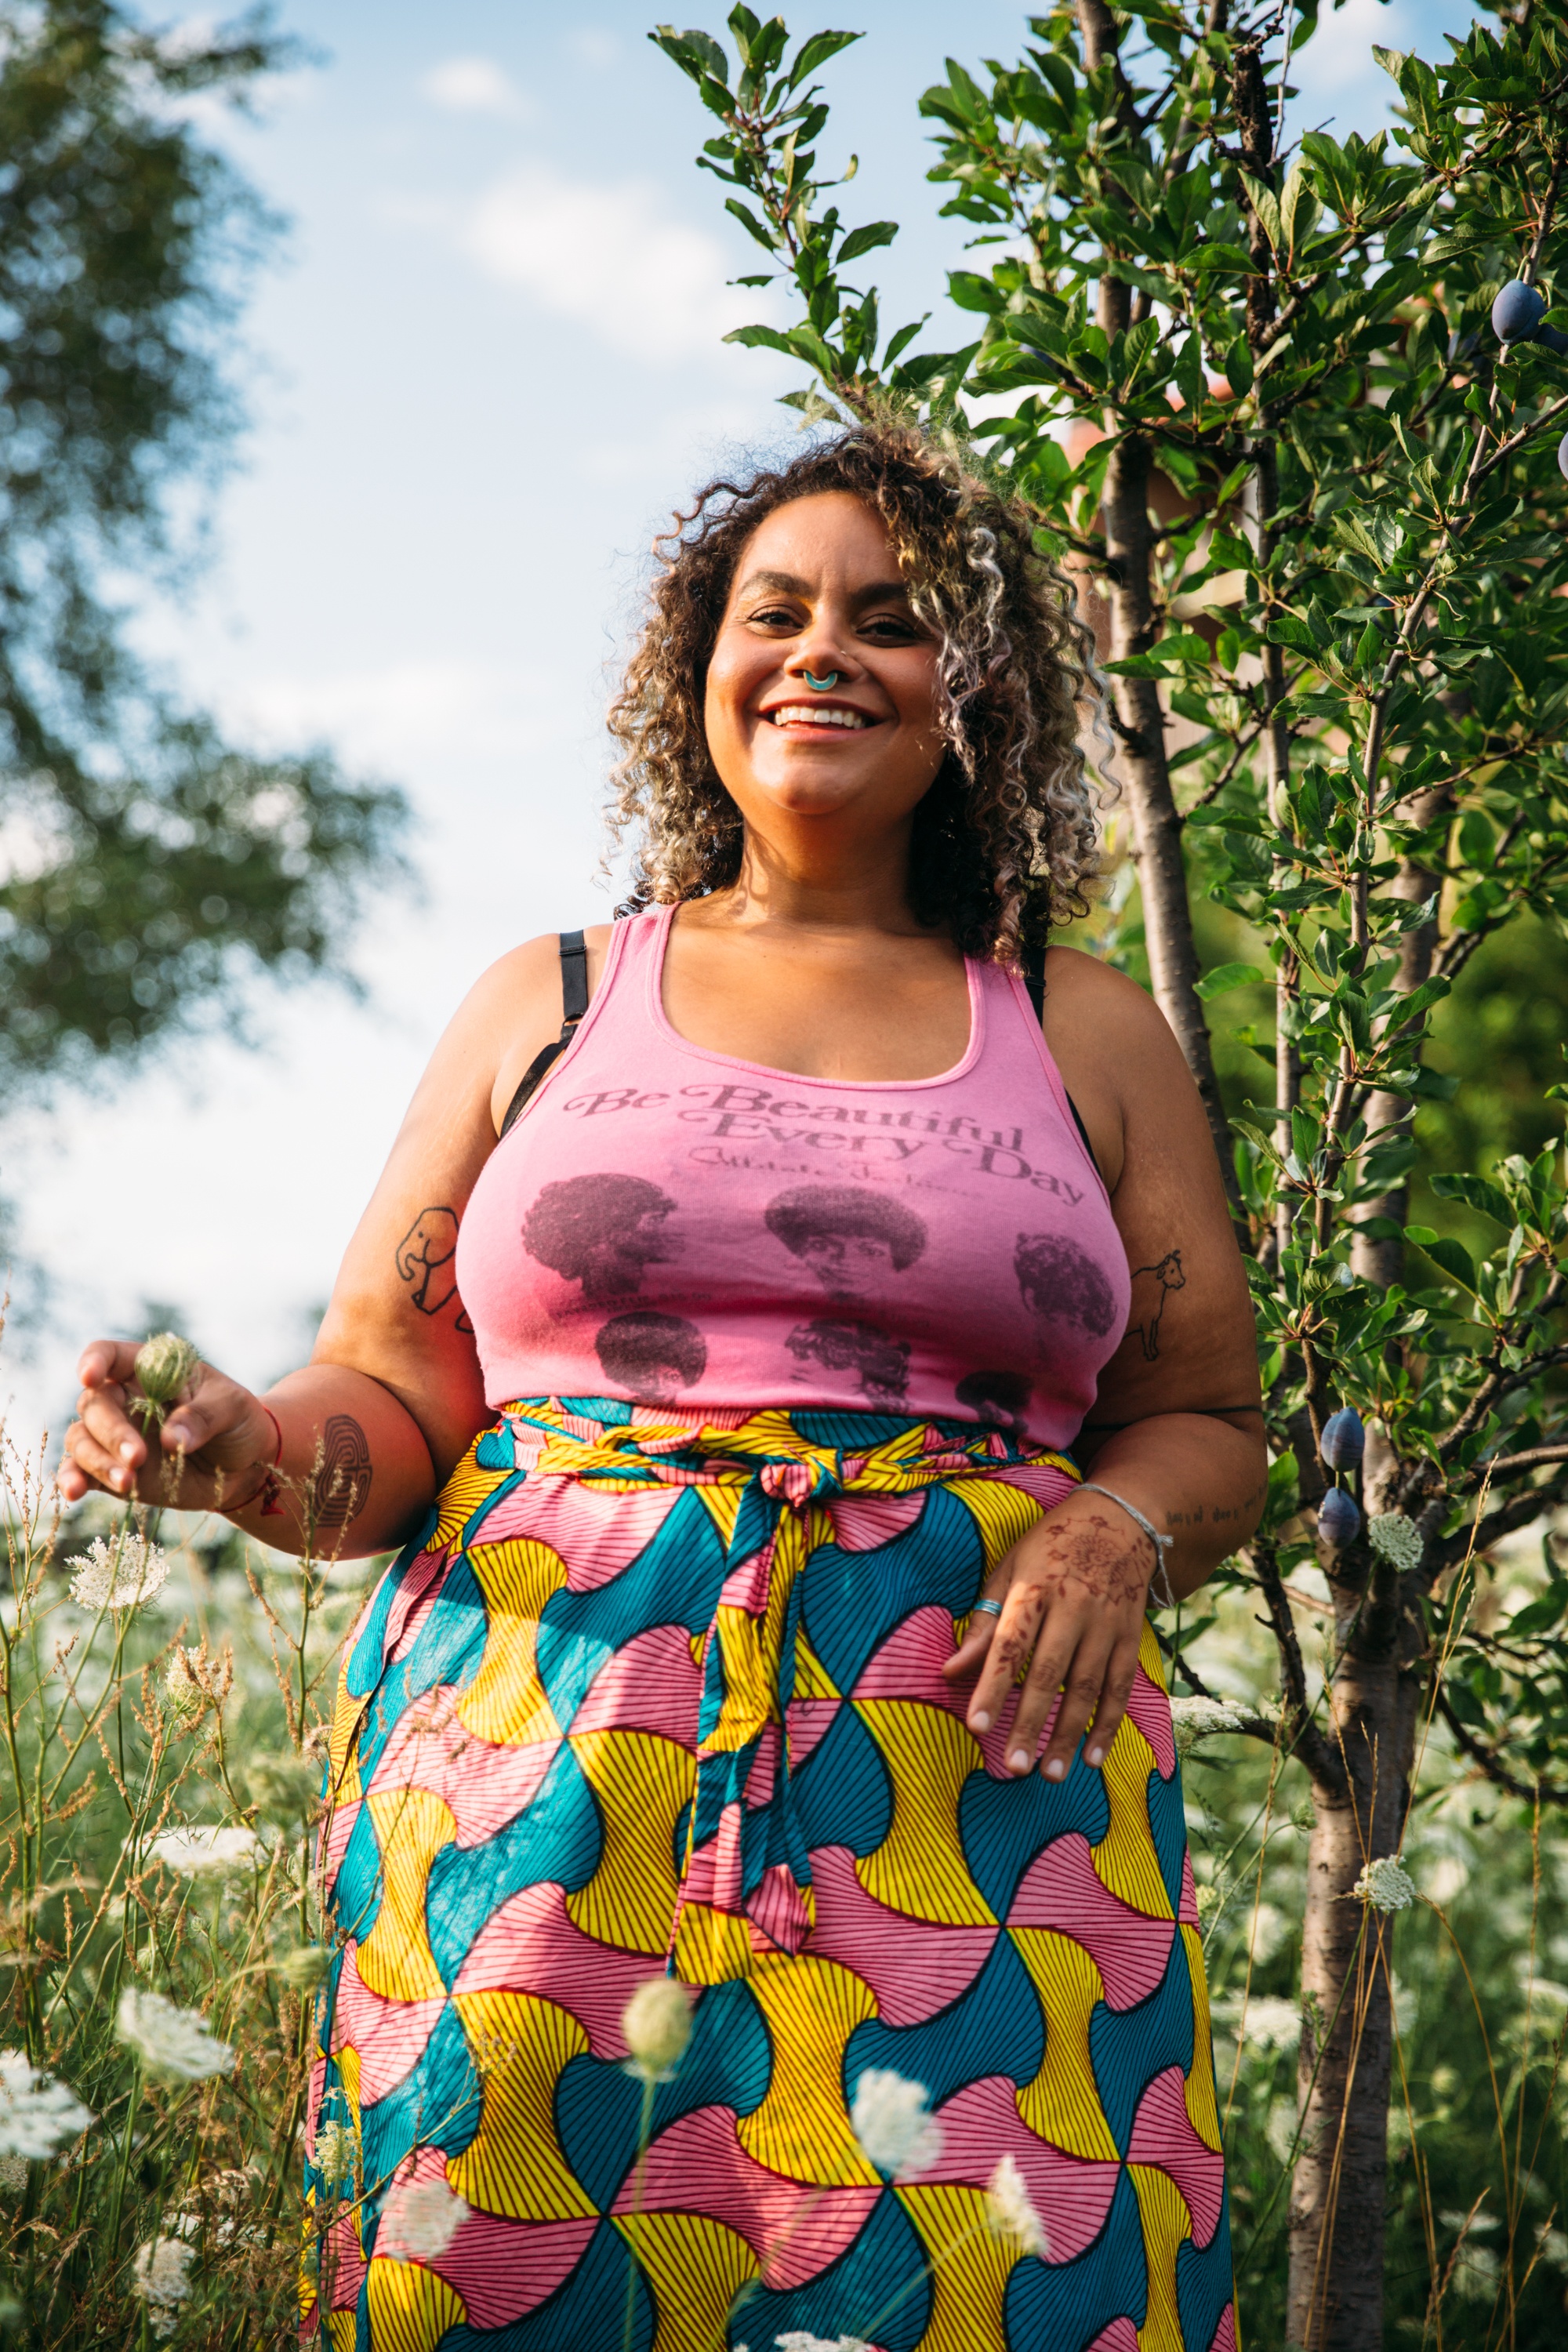 A portrait of adrienne maree brown standing outside surrounded by grasses, flowers, and small trees. She smiles broadly and wears a pink tank top and colorful patterned skirt. 